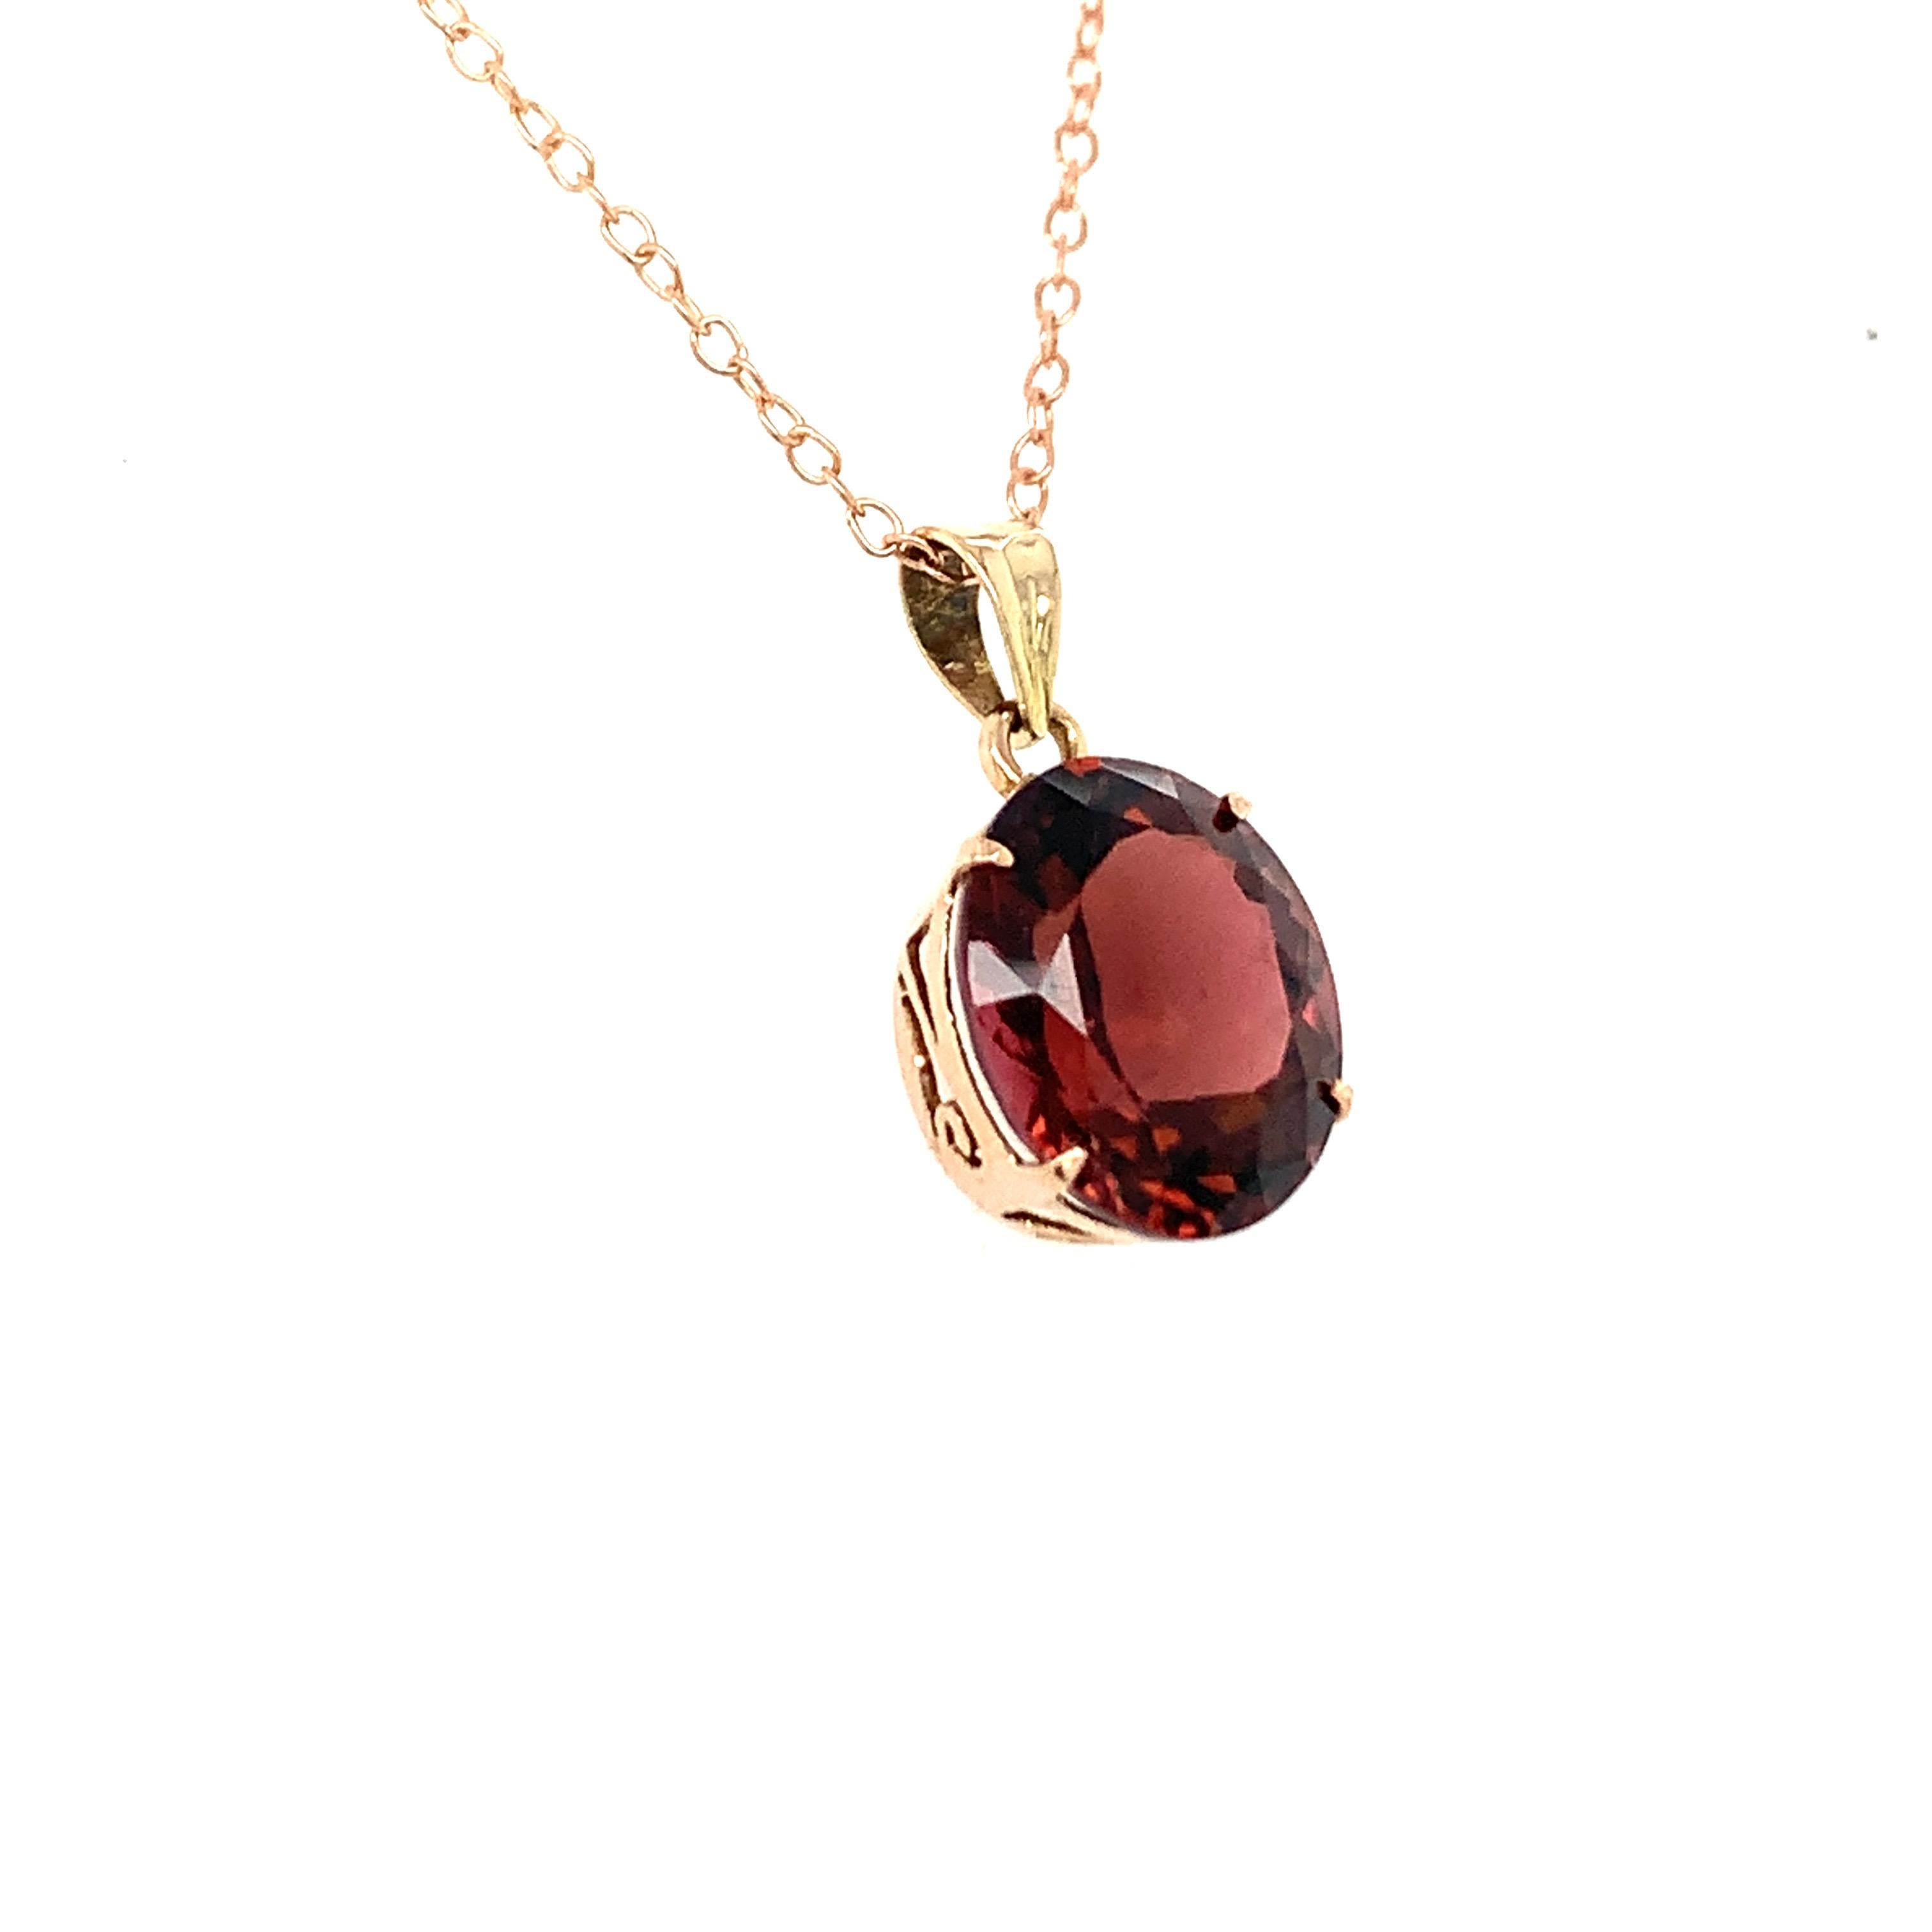 Hand cut and polished natural tourmaline is crafted with hand in 14K yellow gold. 
Ideal for casual daily wear.
Chain is not included. 
Image is enlarged to get a closer view.
Ethically sourced natural gem stone.